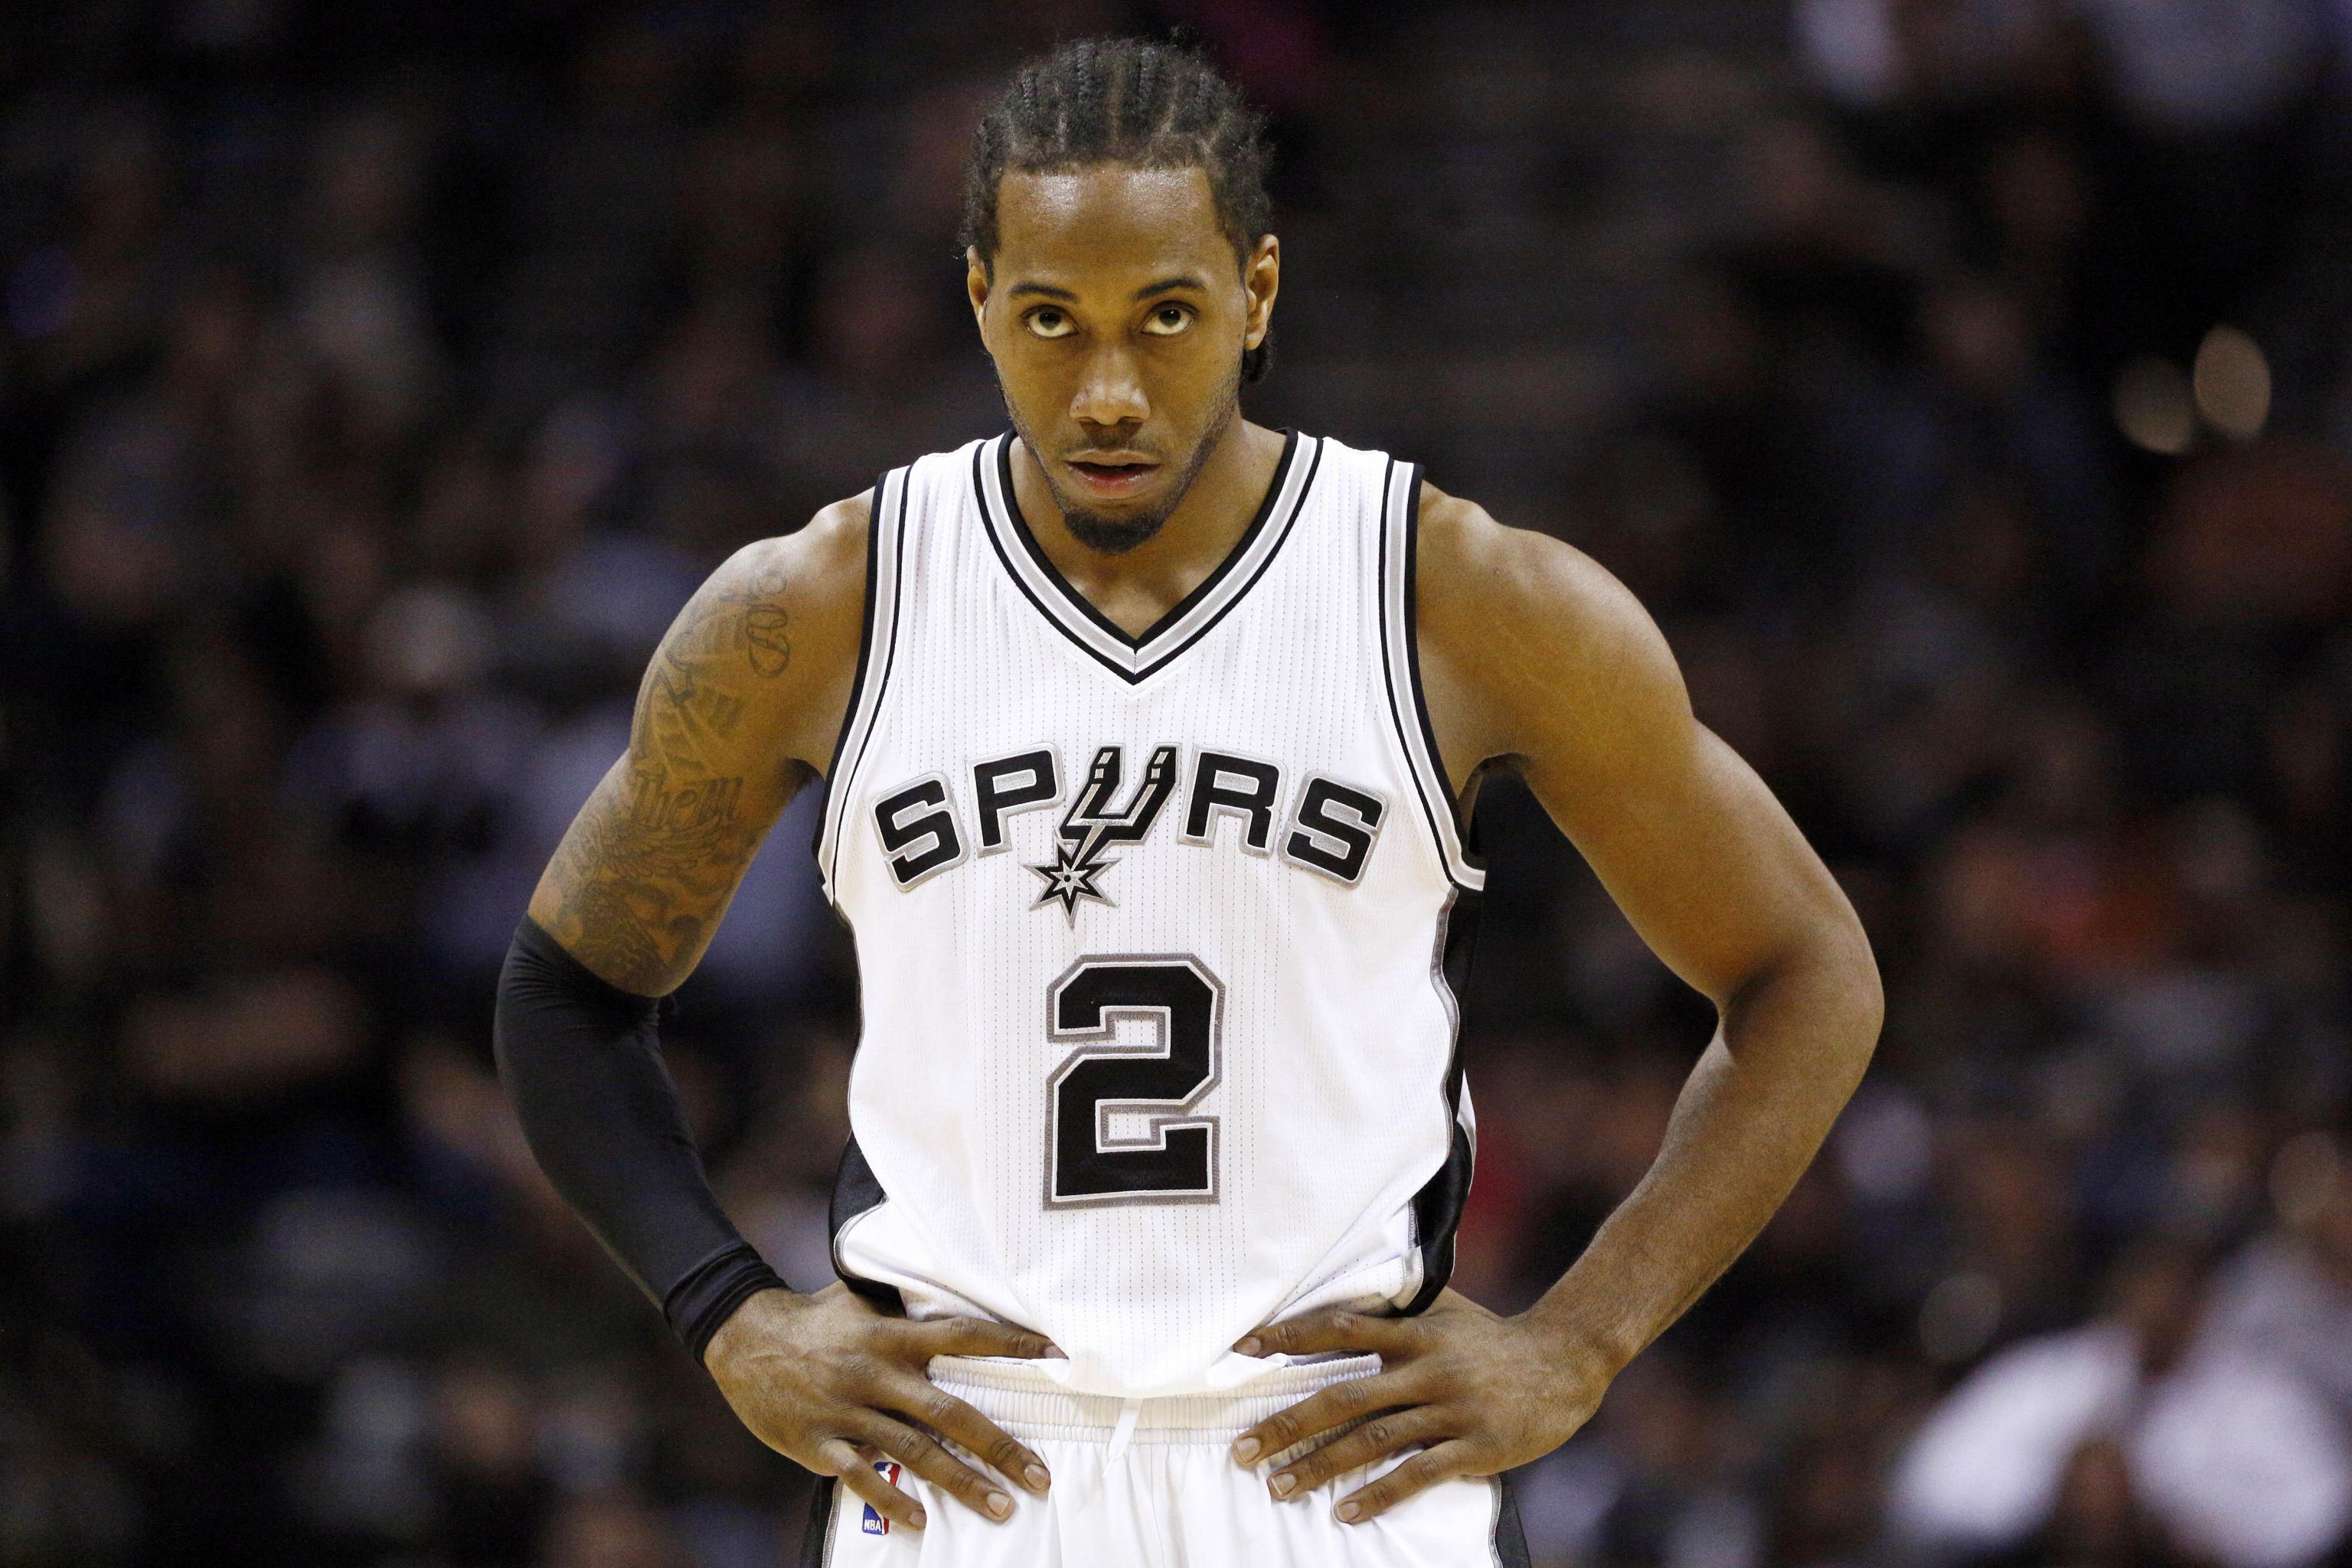 Group Chat': What Is Going on With Kawhi Leonard and the Spurs